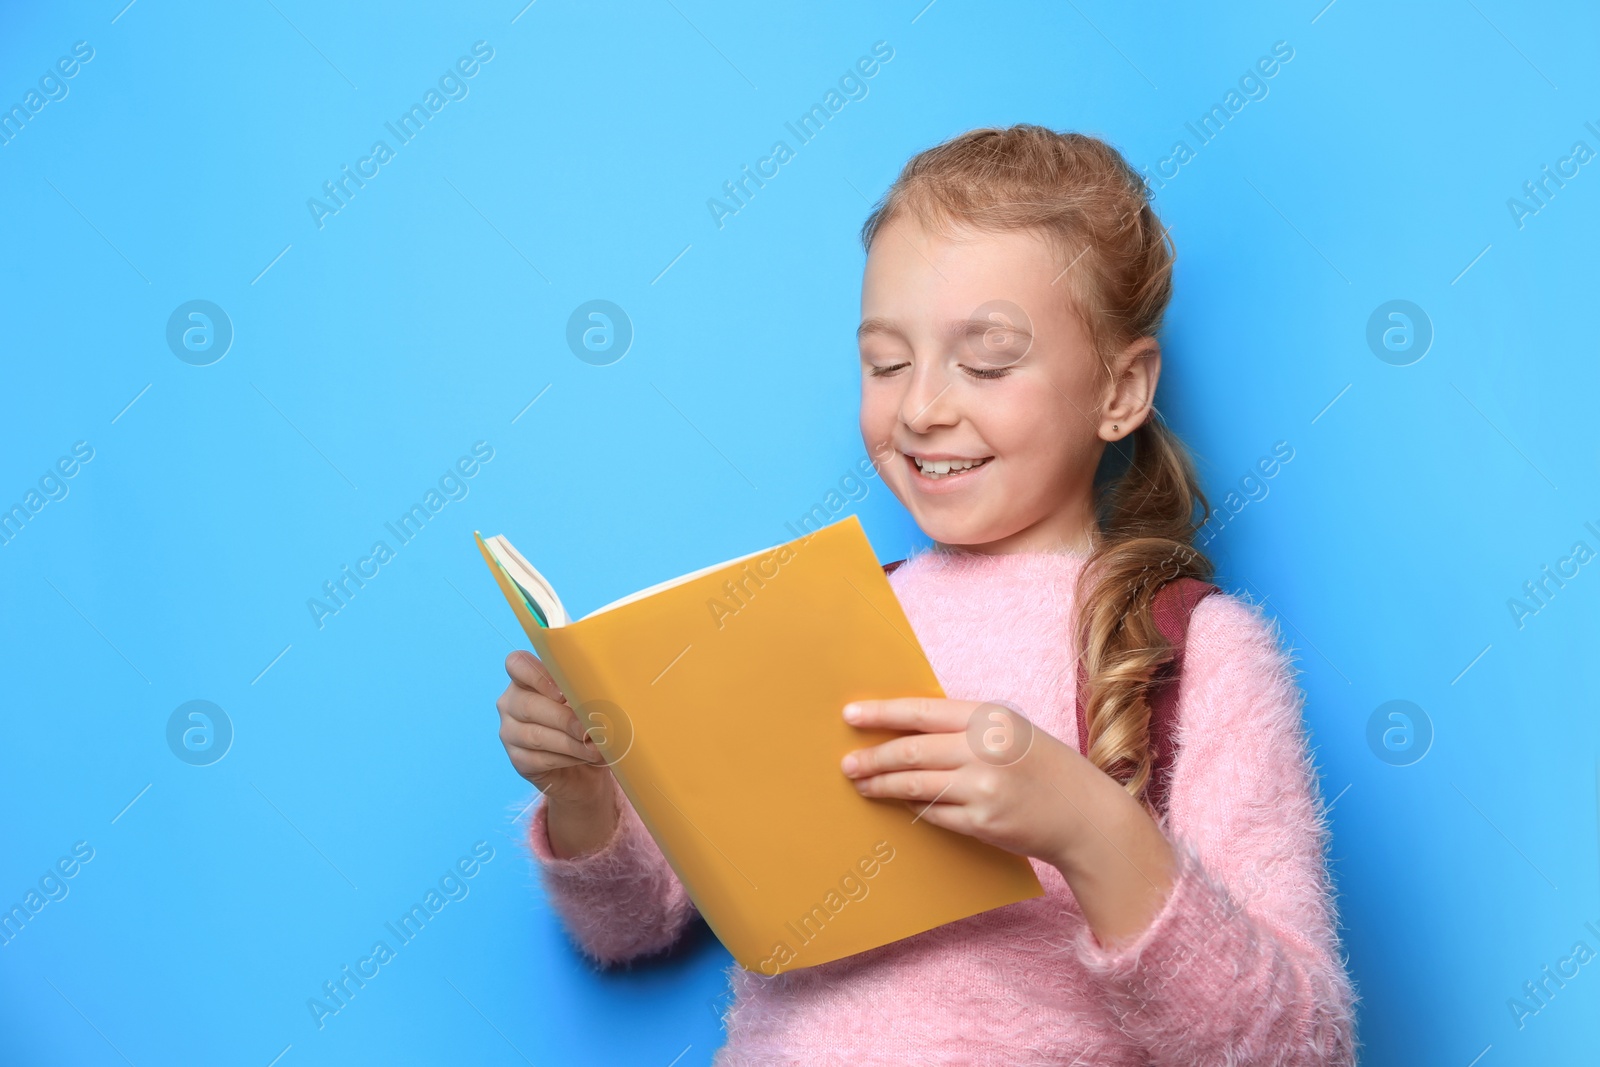 Photo of Happy little girl with backpack reading book on light blue background